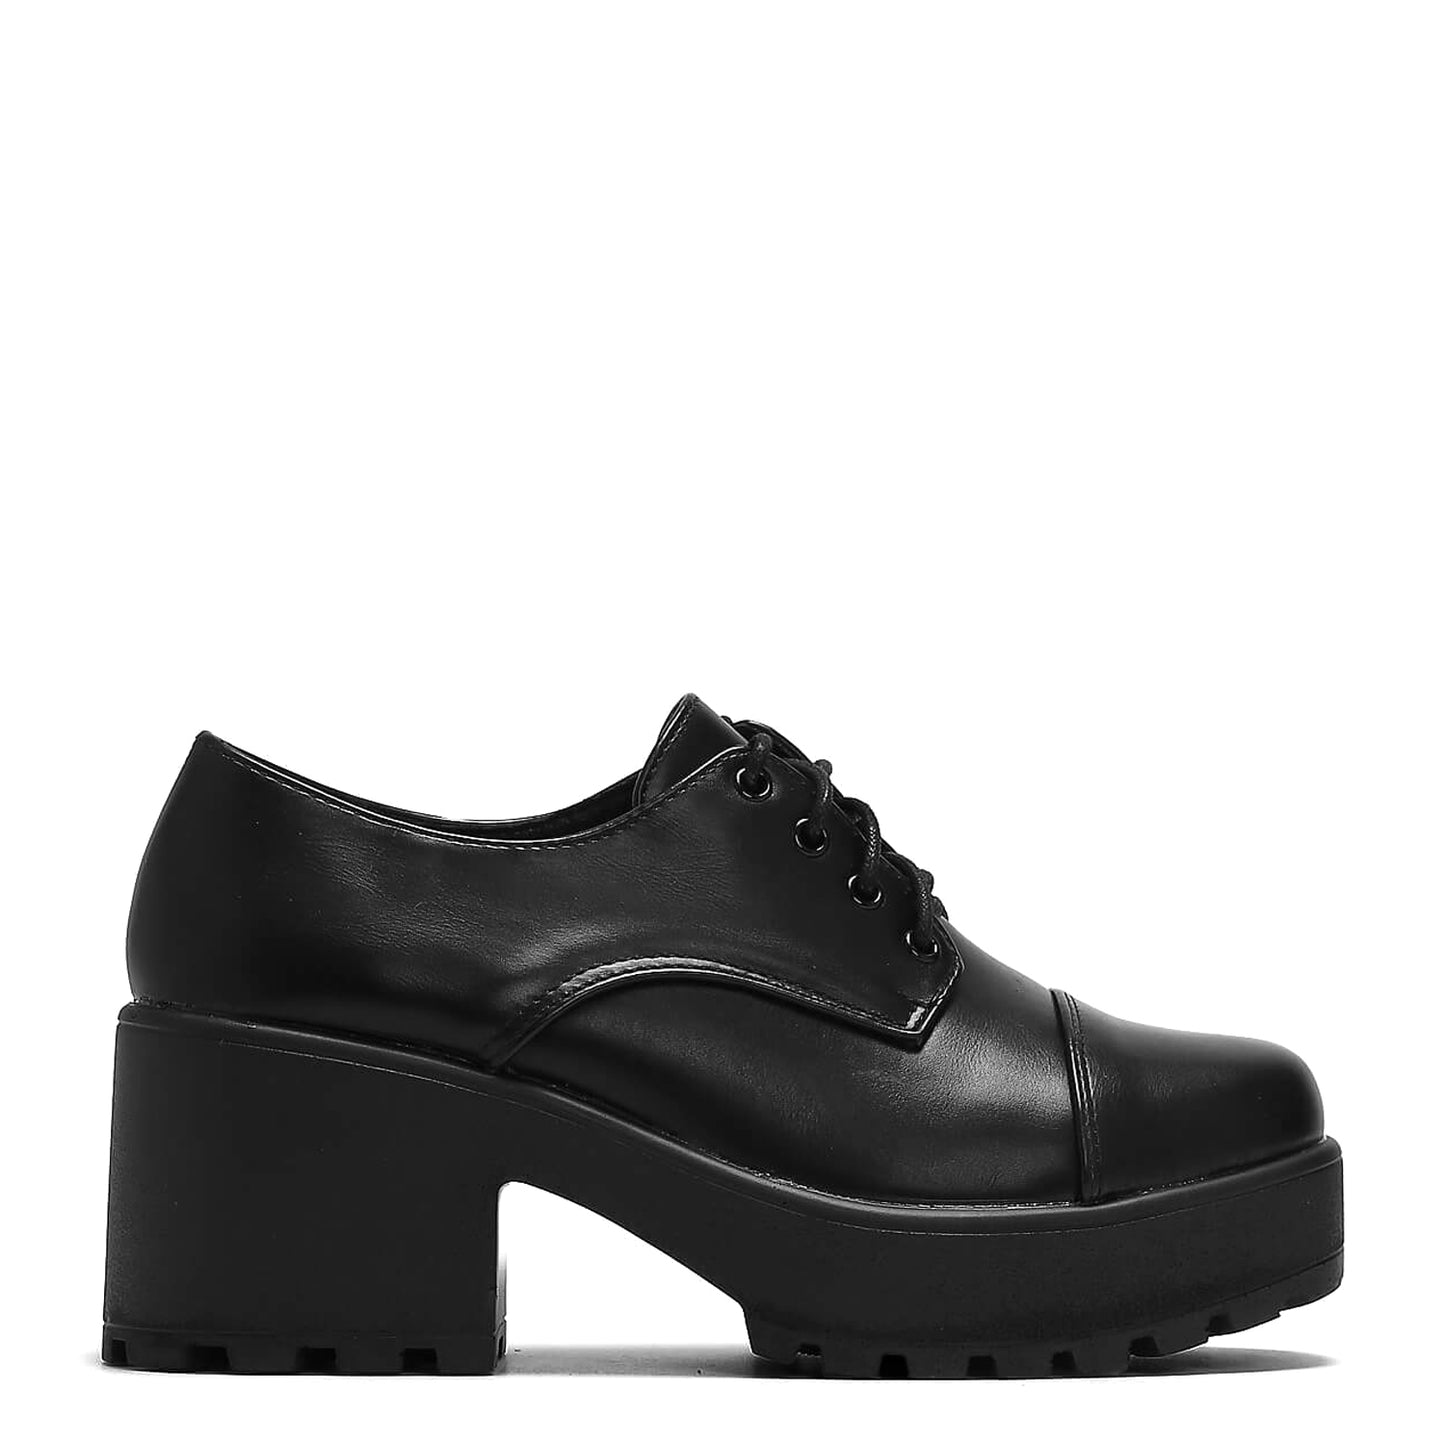 Rei Chunky Lace Up Shoes - Shoes - KOI Footwear - Black - Main View